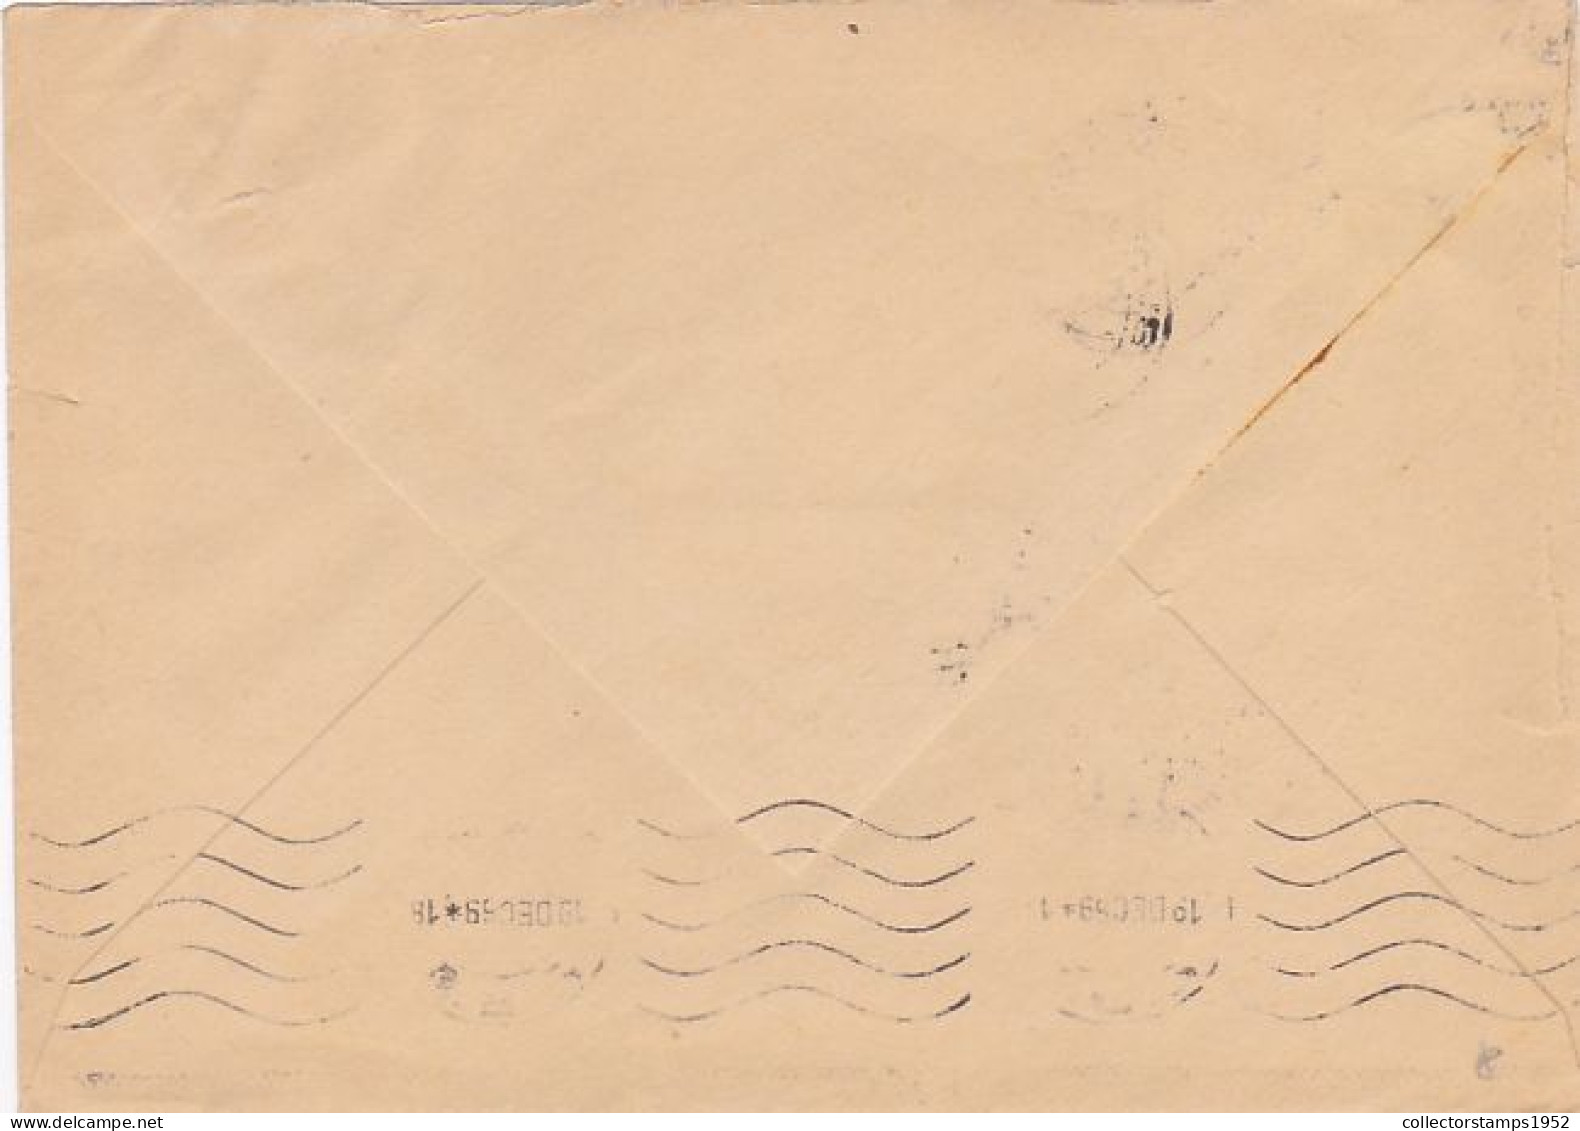 BUCHAREST, COMPANY ADVERTISING, AMOUNT 1.55, RED MACHINE STAMPS ON REGISTERED COVER, 1969, ROMANIA - Briefe U. Dokumente